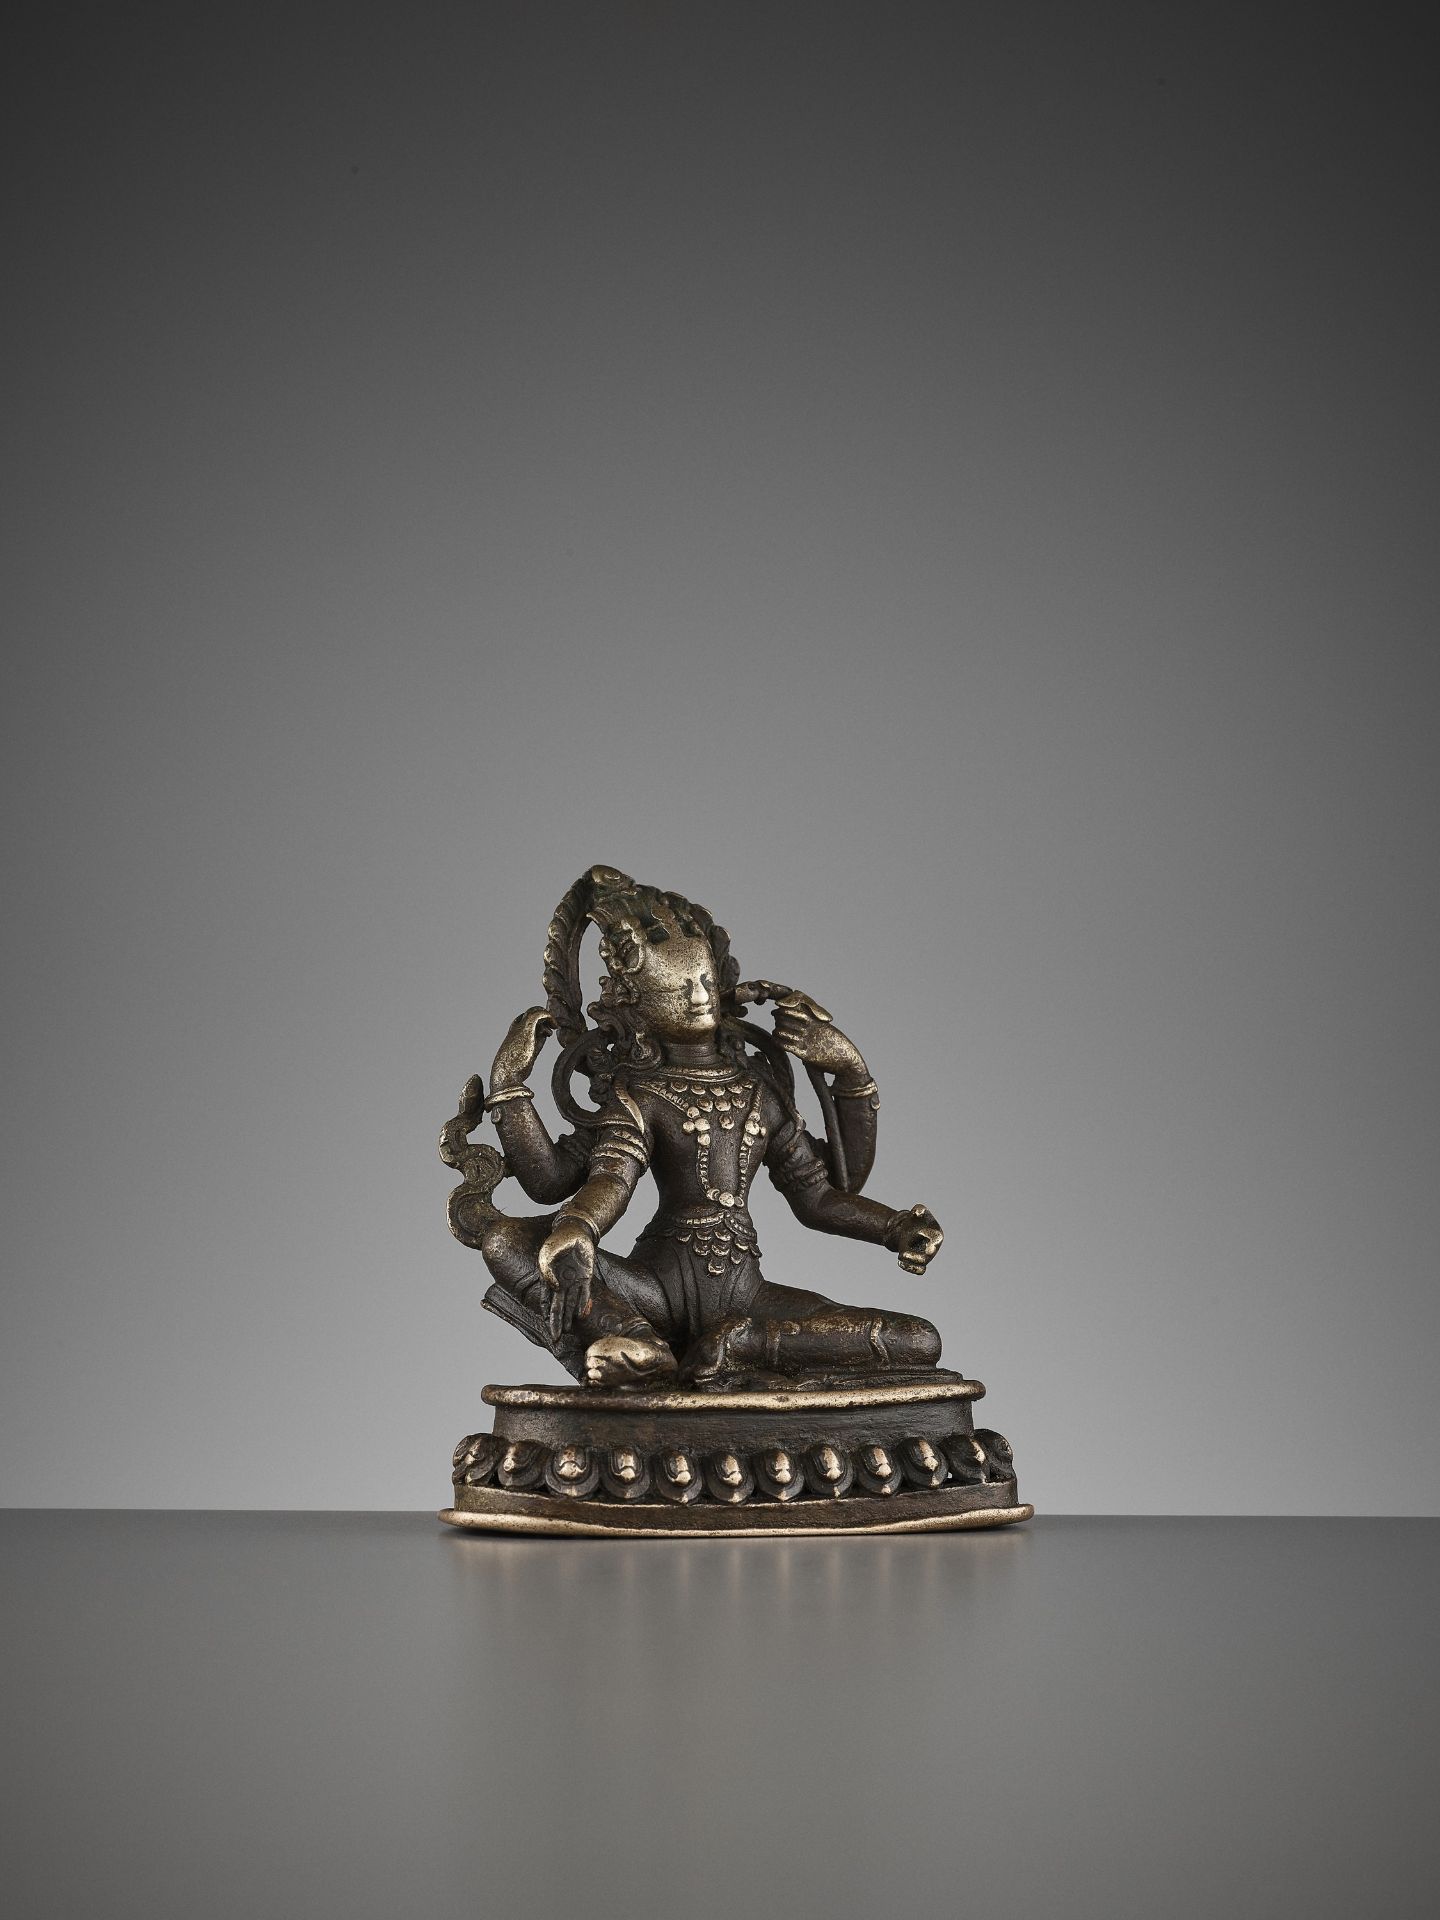 A SMALL BRONZE OF THE FOUR-ARMED AVALOKITESVARA, 15TH-16TH CENTURY - Image 9 of 11